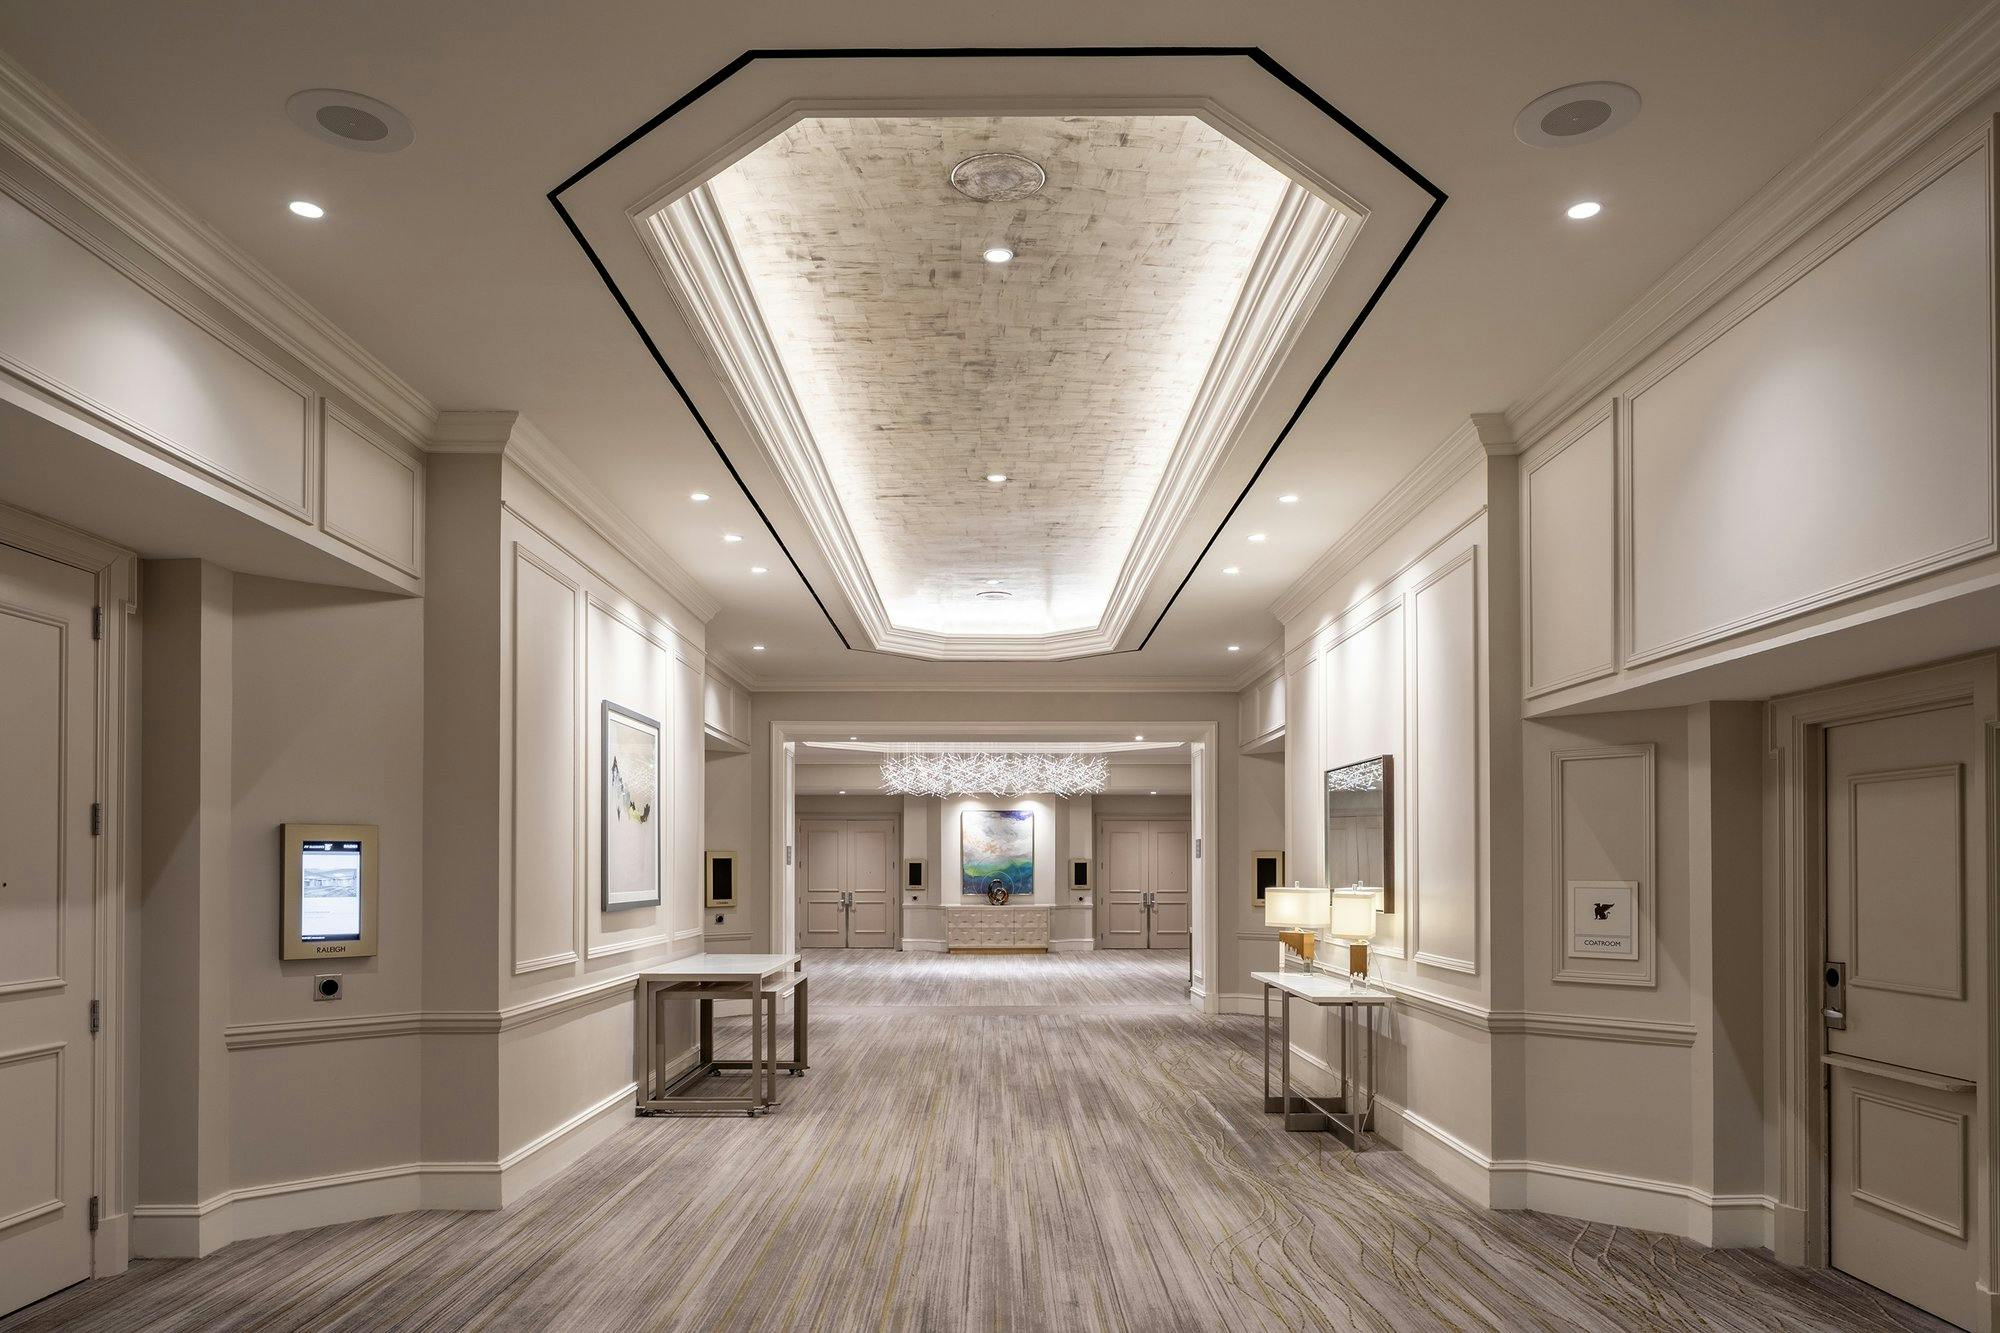 A hallway in a hotel with a ceiling light.